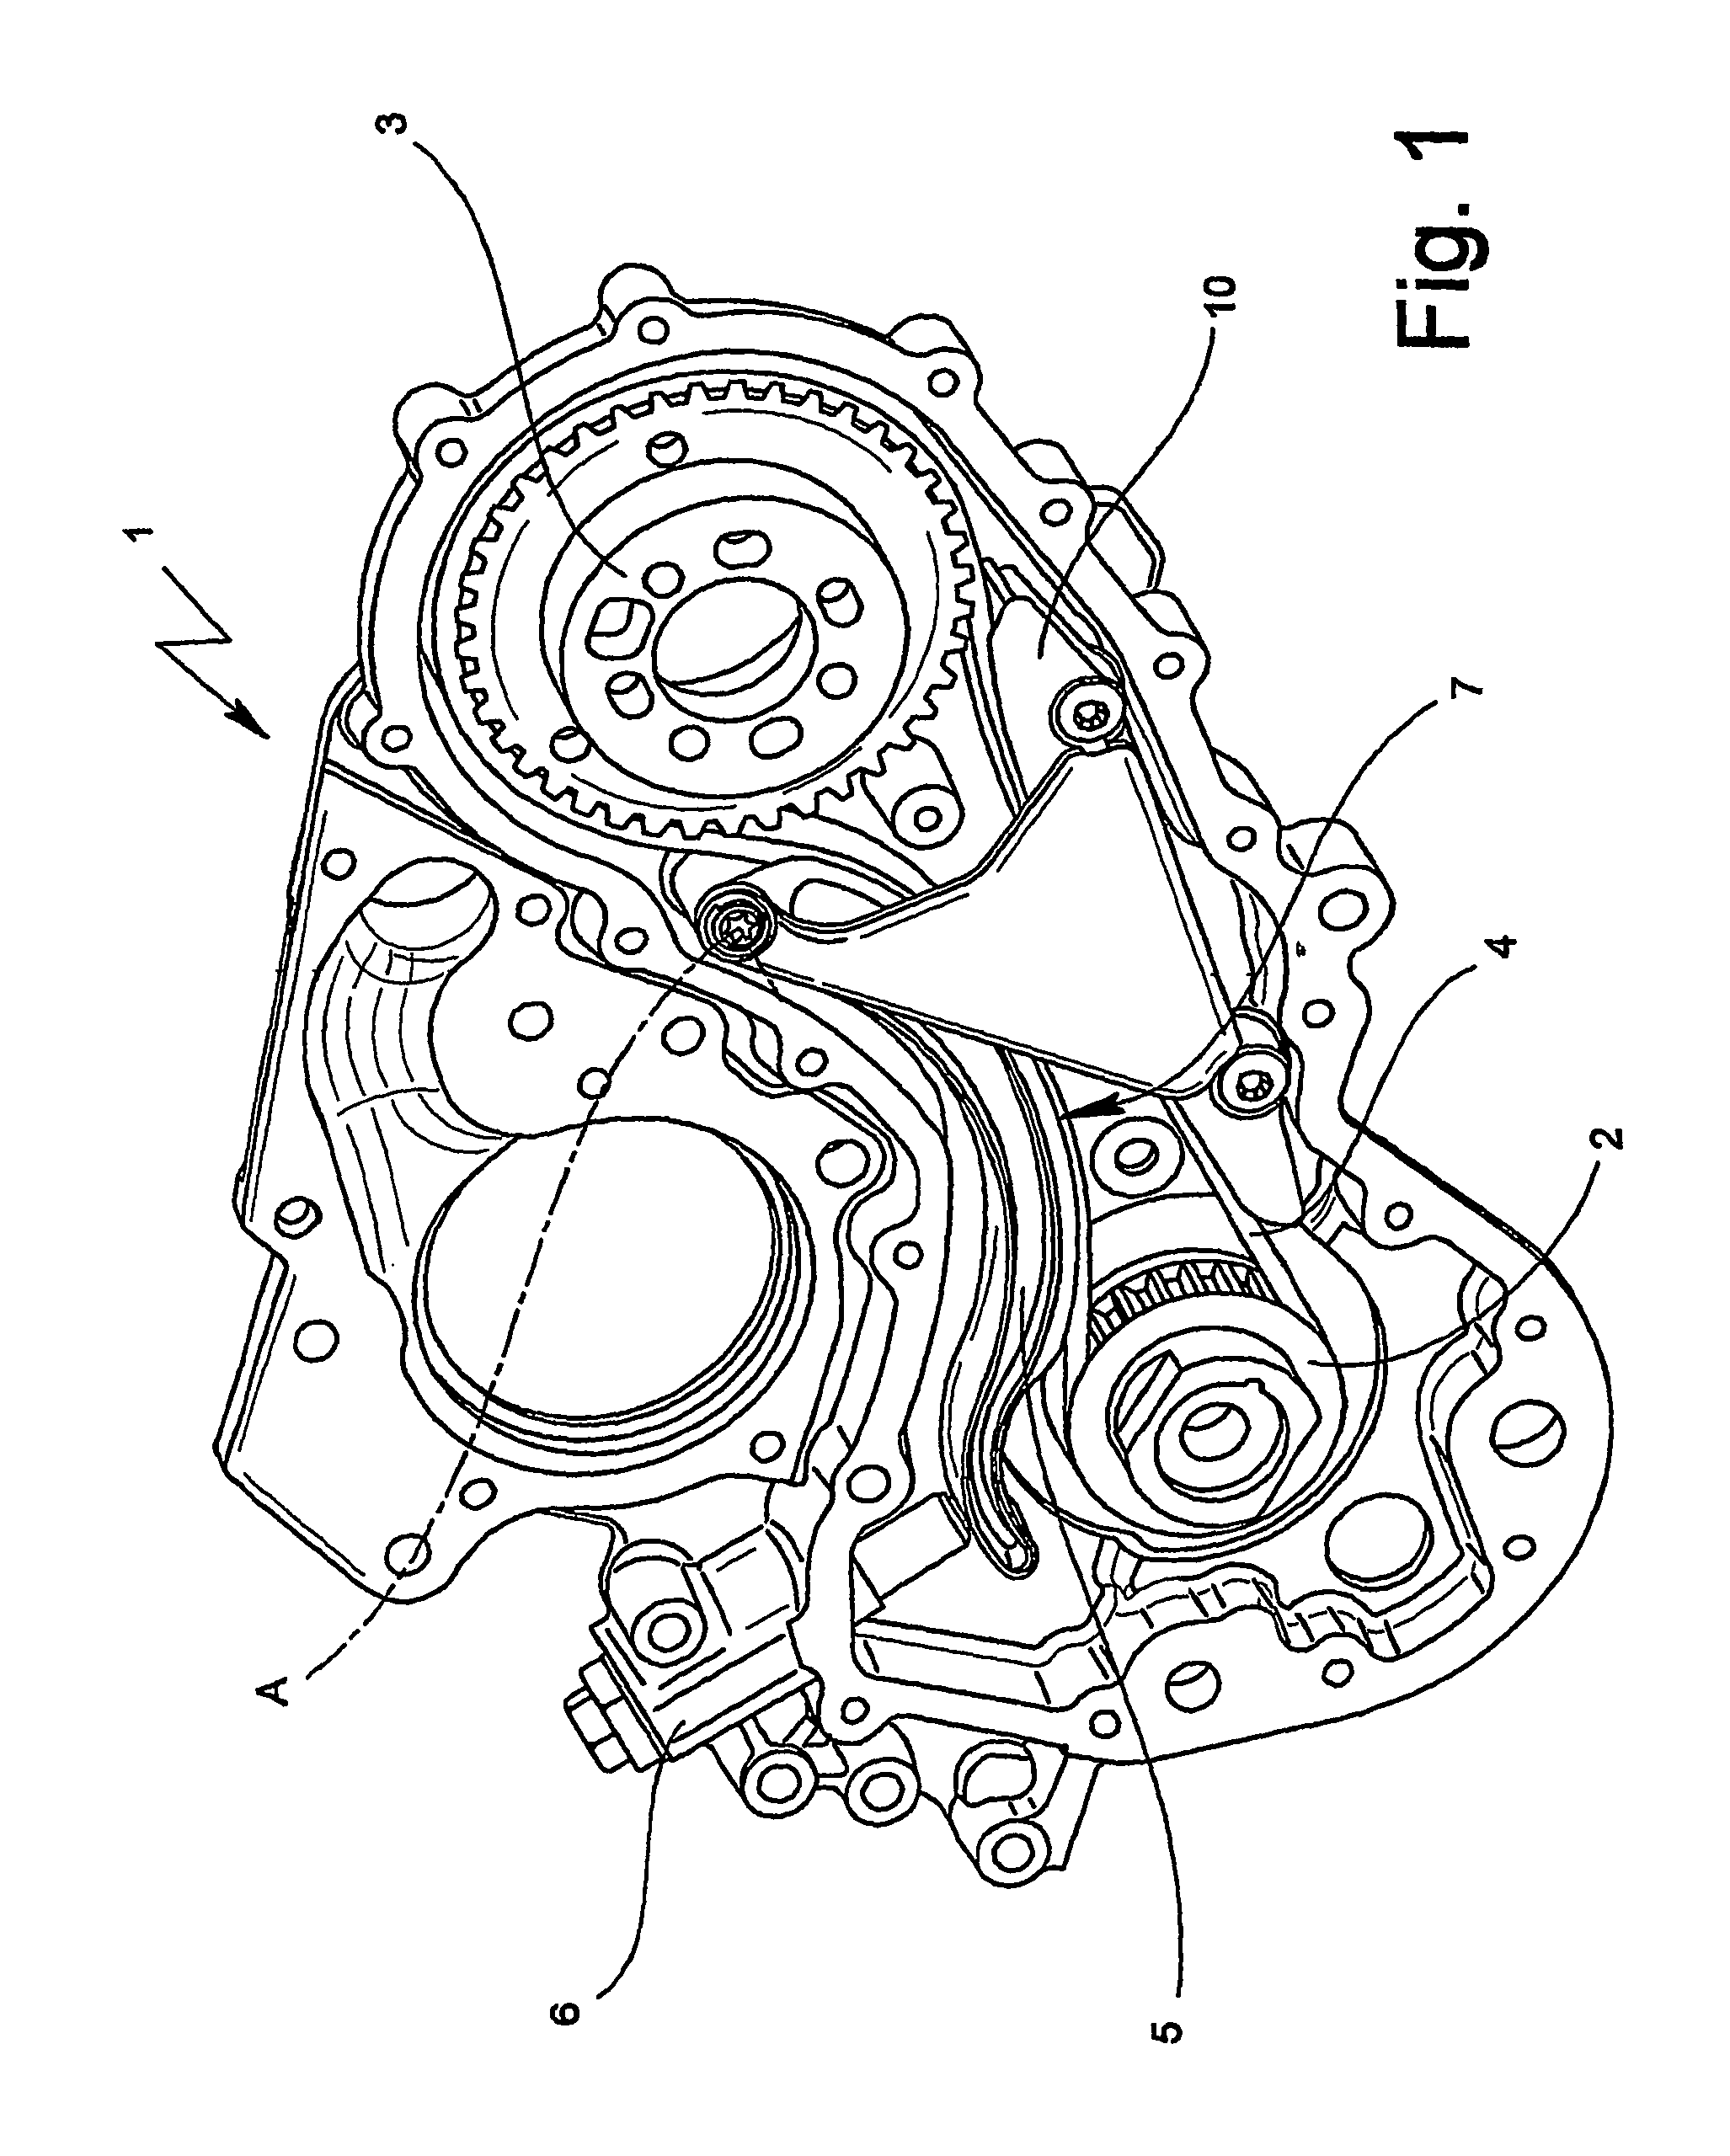 Drive for an internal combustion engine comprising an oil wet toothed belt and a tensioning shoe